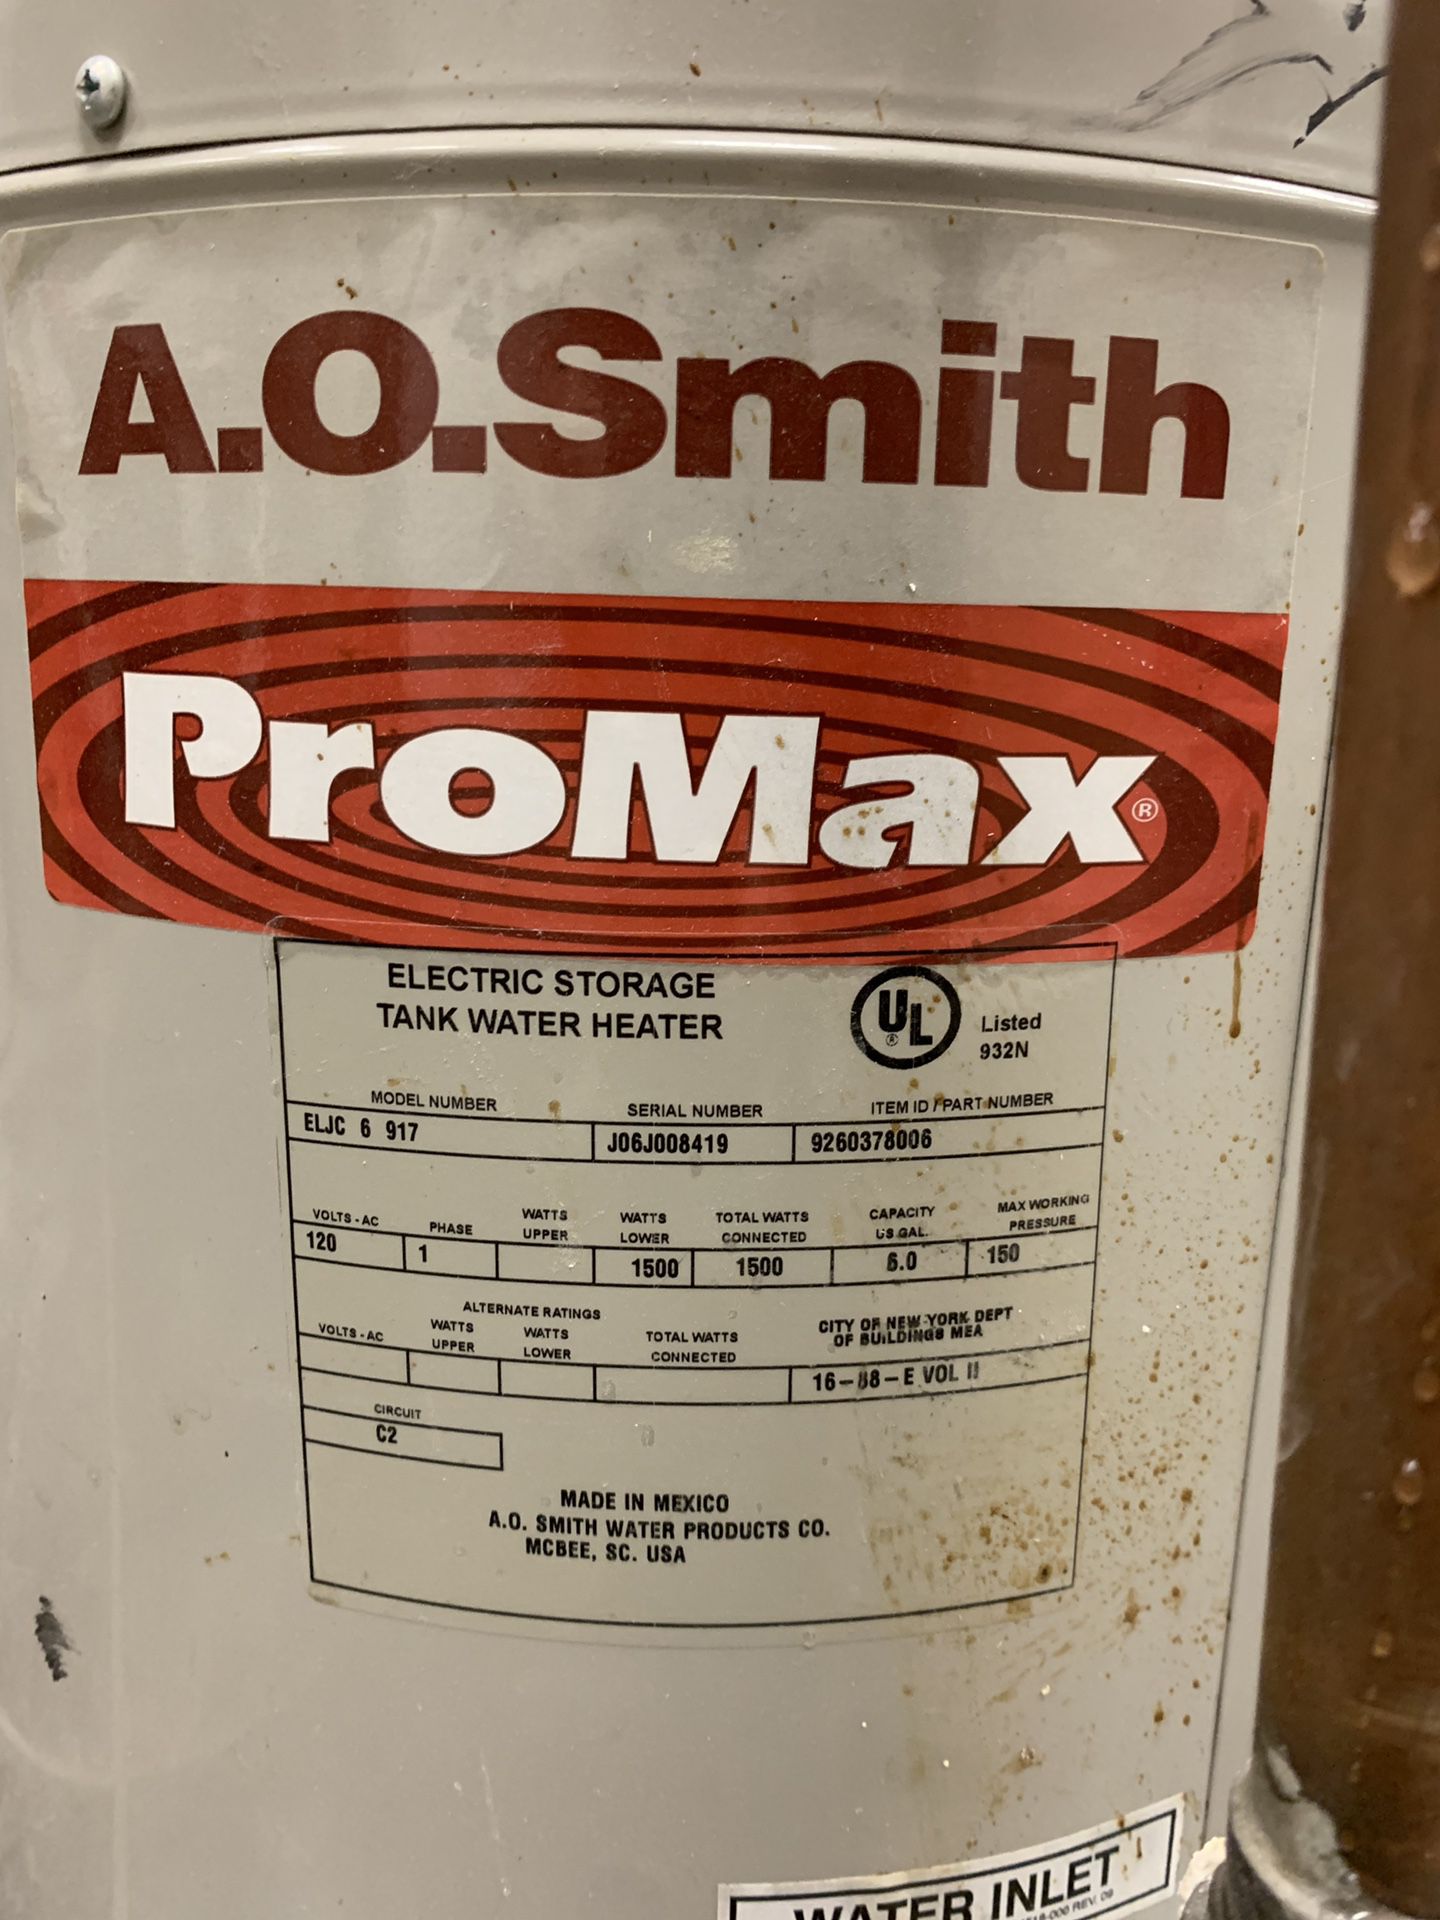 A.O.smith. Model number ELJC 6917 6 gallon water heater